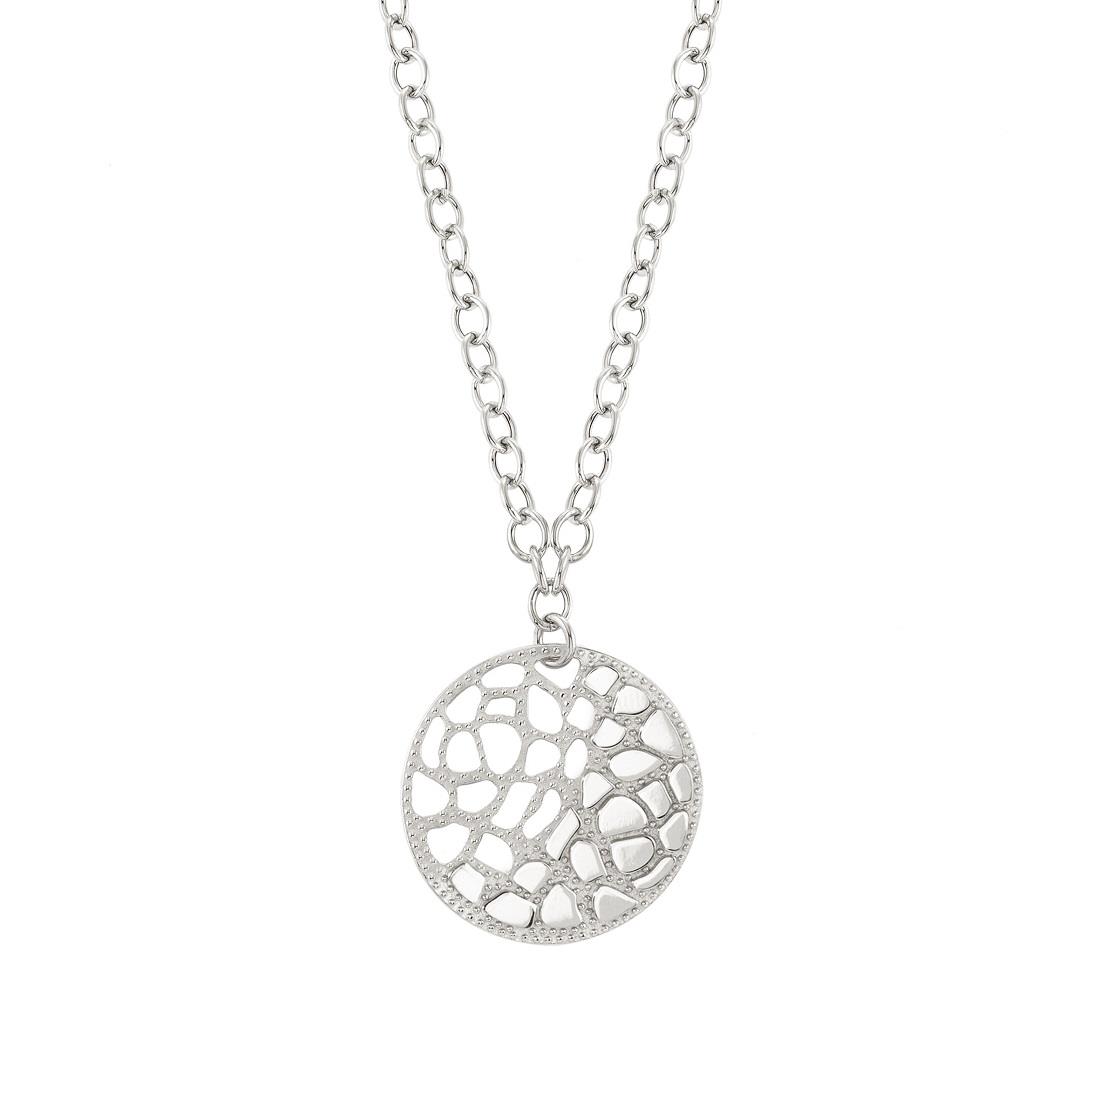 Silver necklace with medallion pendant - NOMINATION